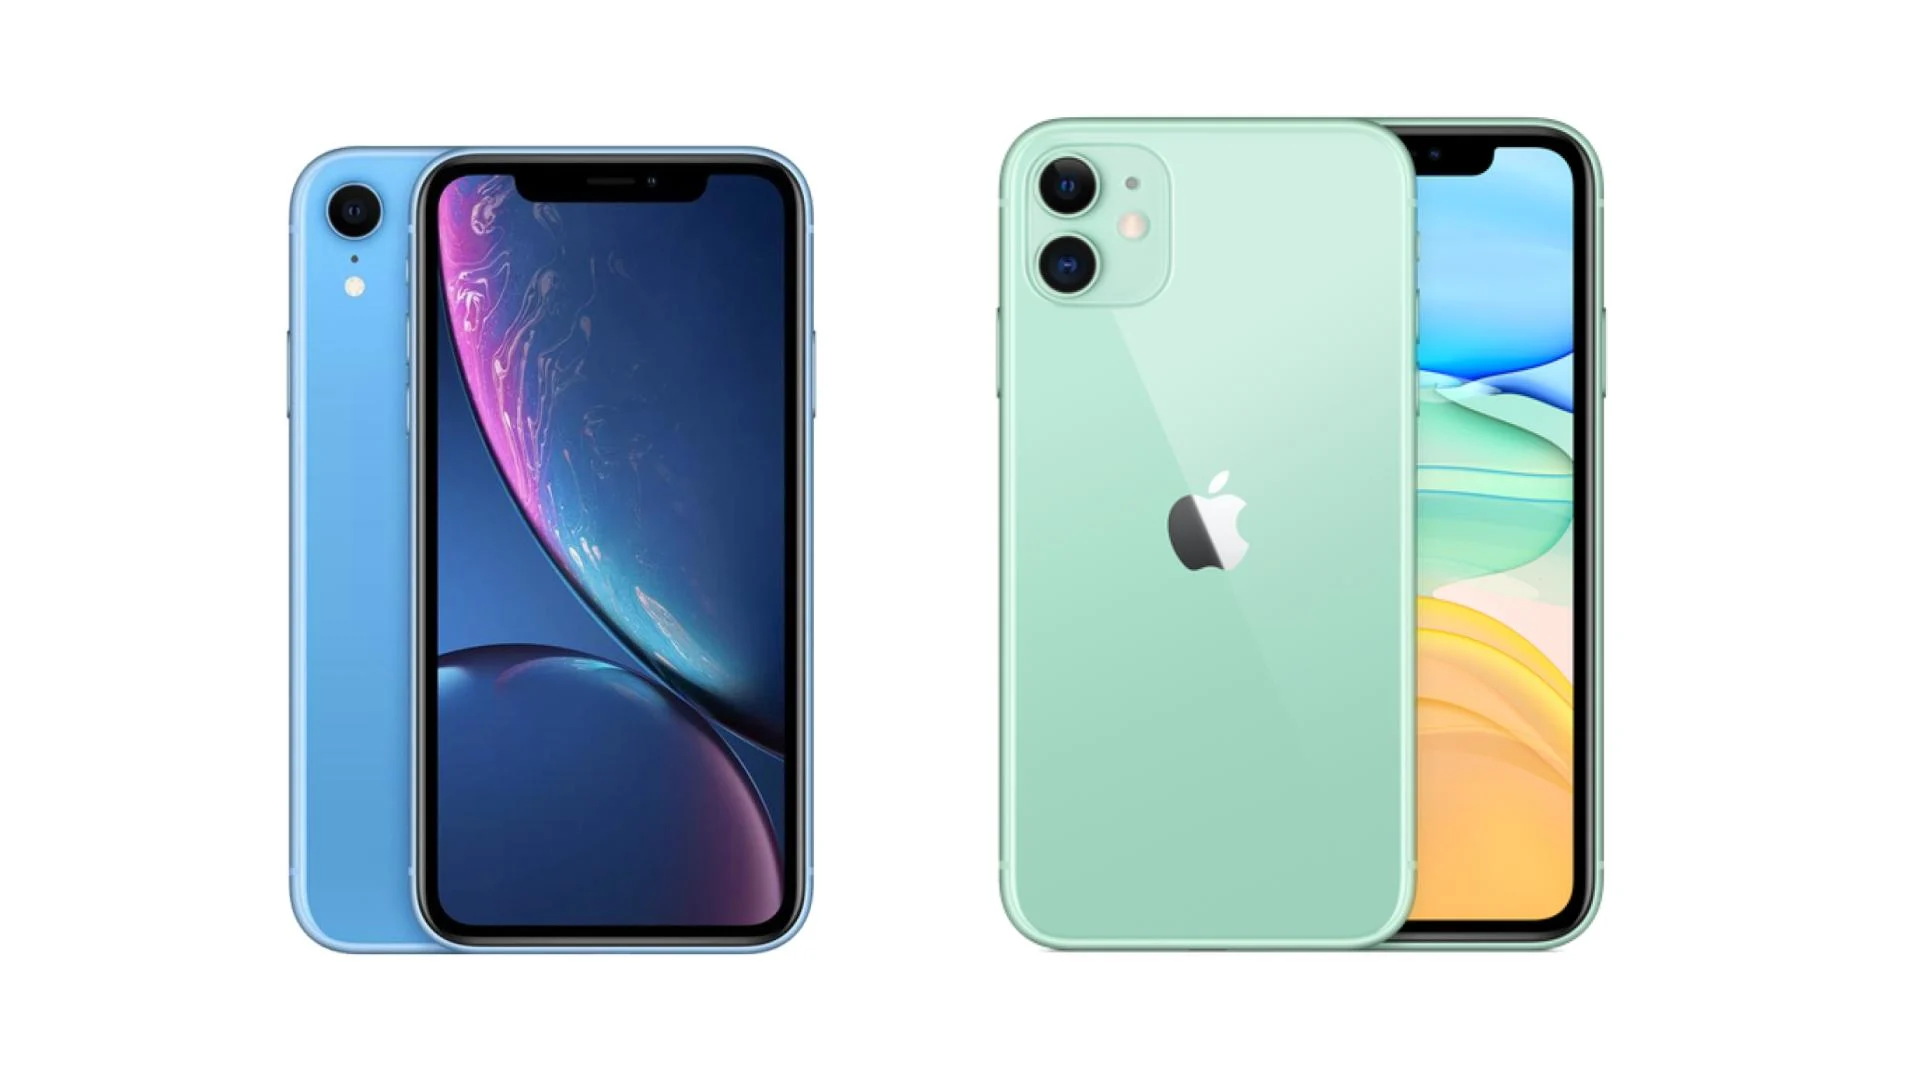 Price Comparison: Apple iPhone 11 vs. iPhone X in Pakistan - What You Need to Know